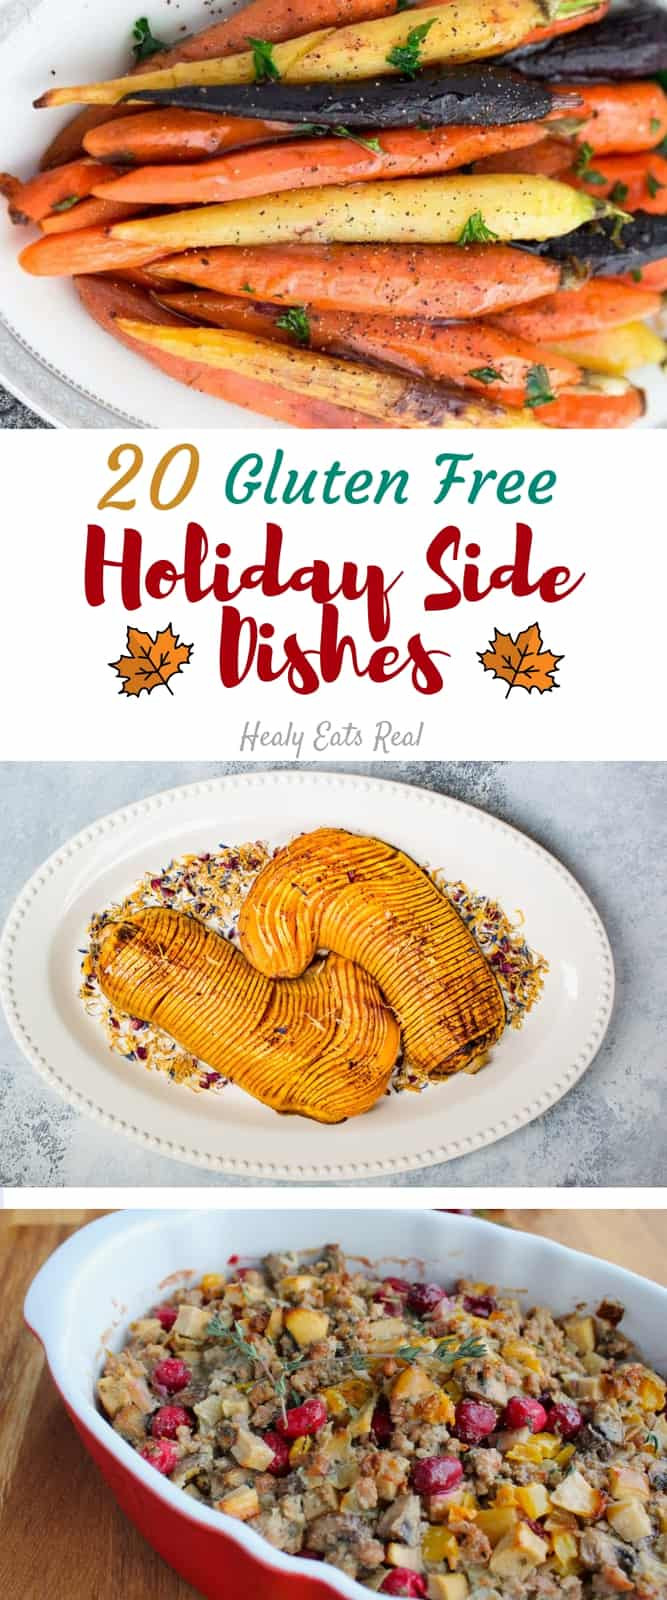 Gluten Free Dairy Free Side Dishes
 20 Delicious Gluten Free Side Dishes for the Holidays